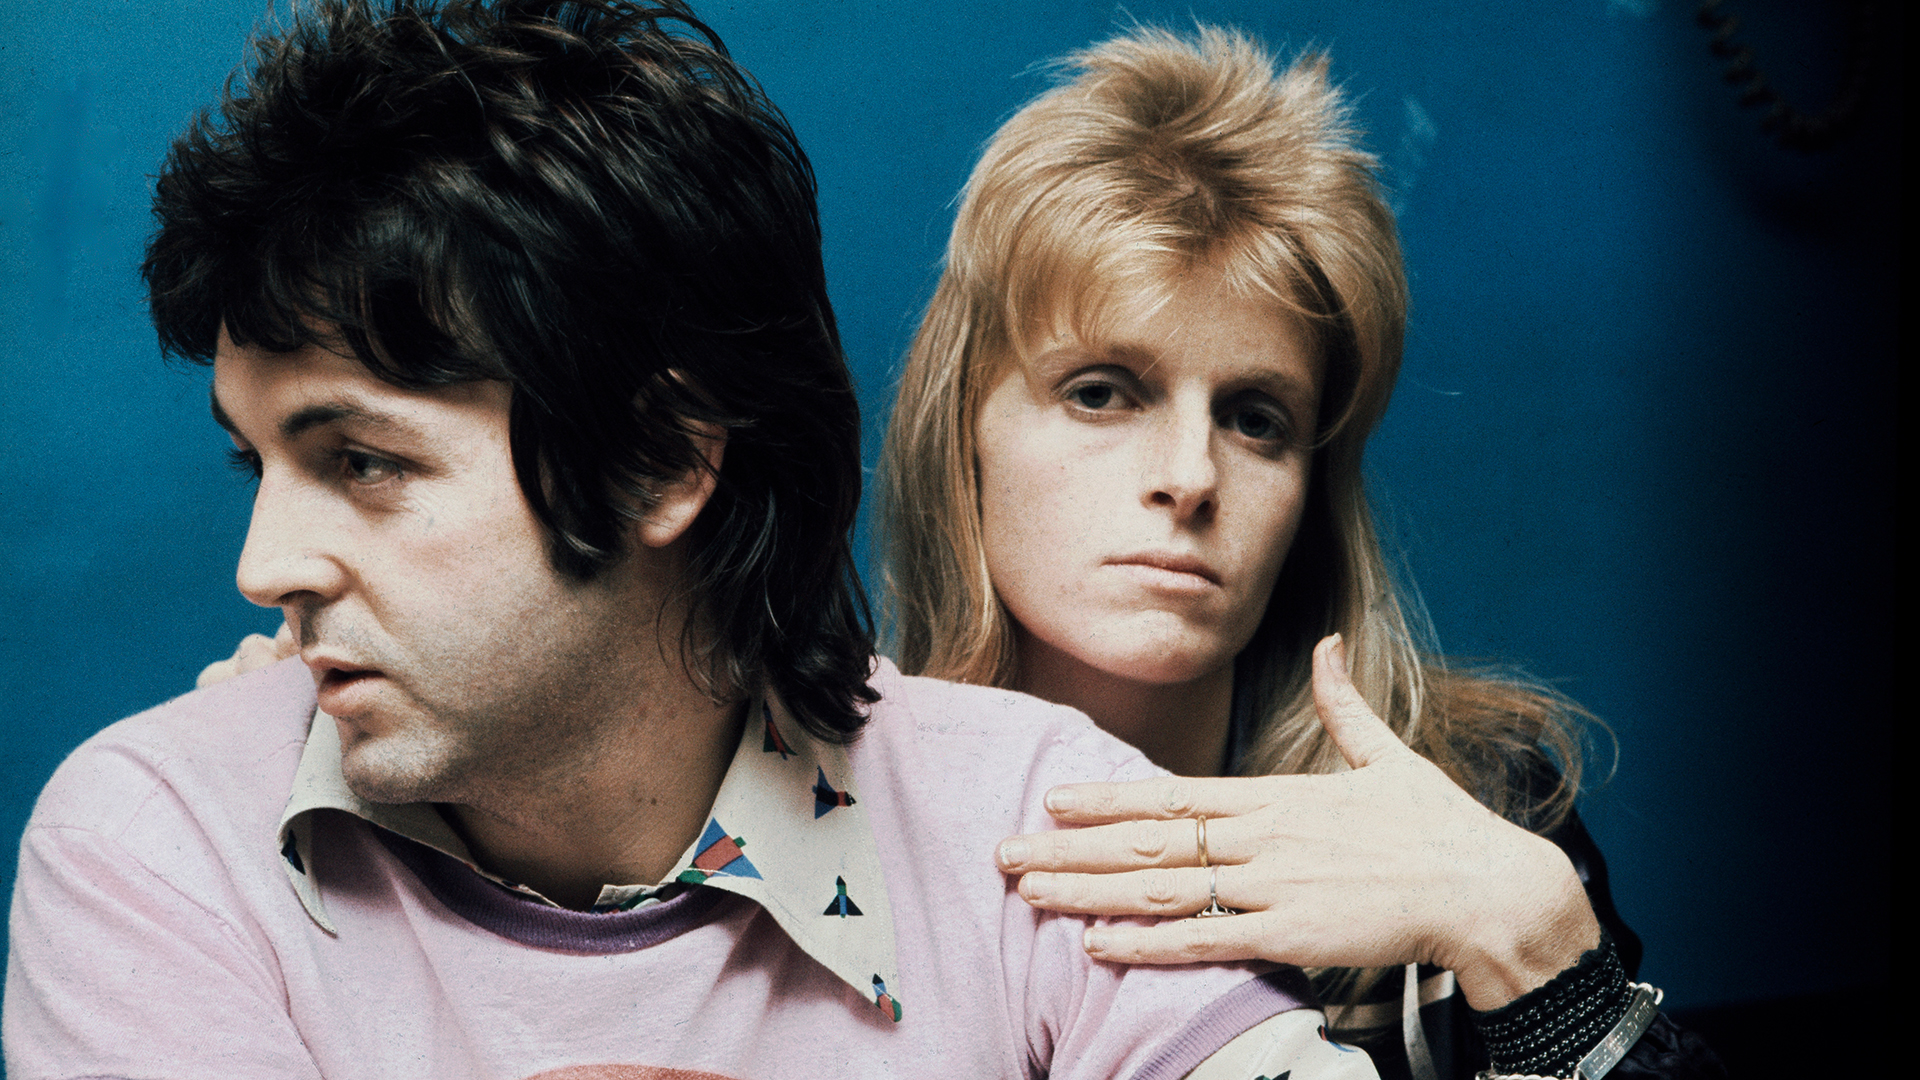 Paul McCartney and Linda McCartney of pop group Wings, London, 21st November 1973. (Photo by Michael Putland/Getty Images)